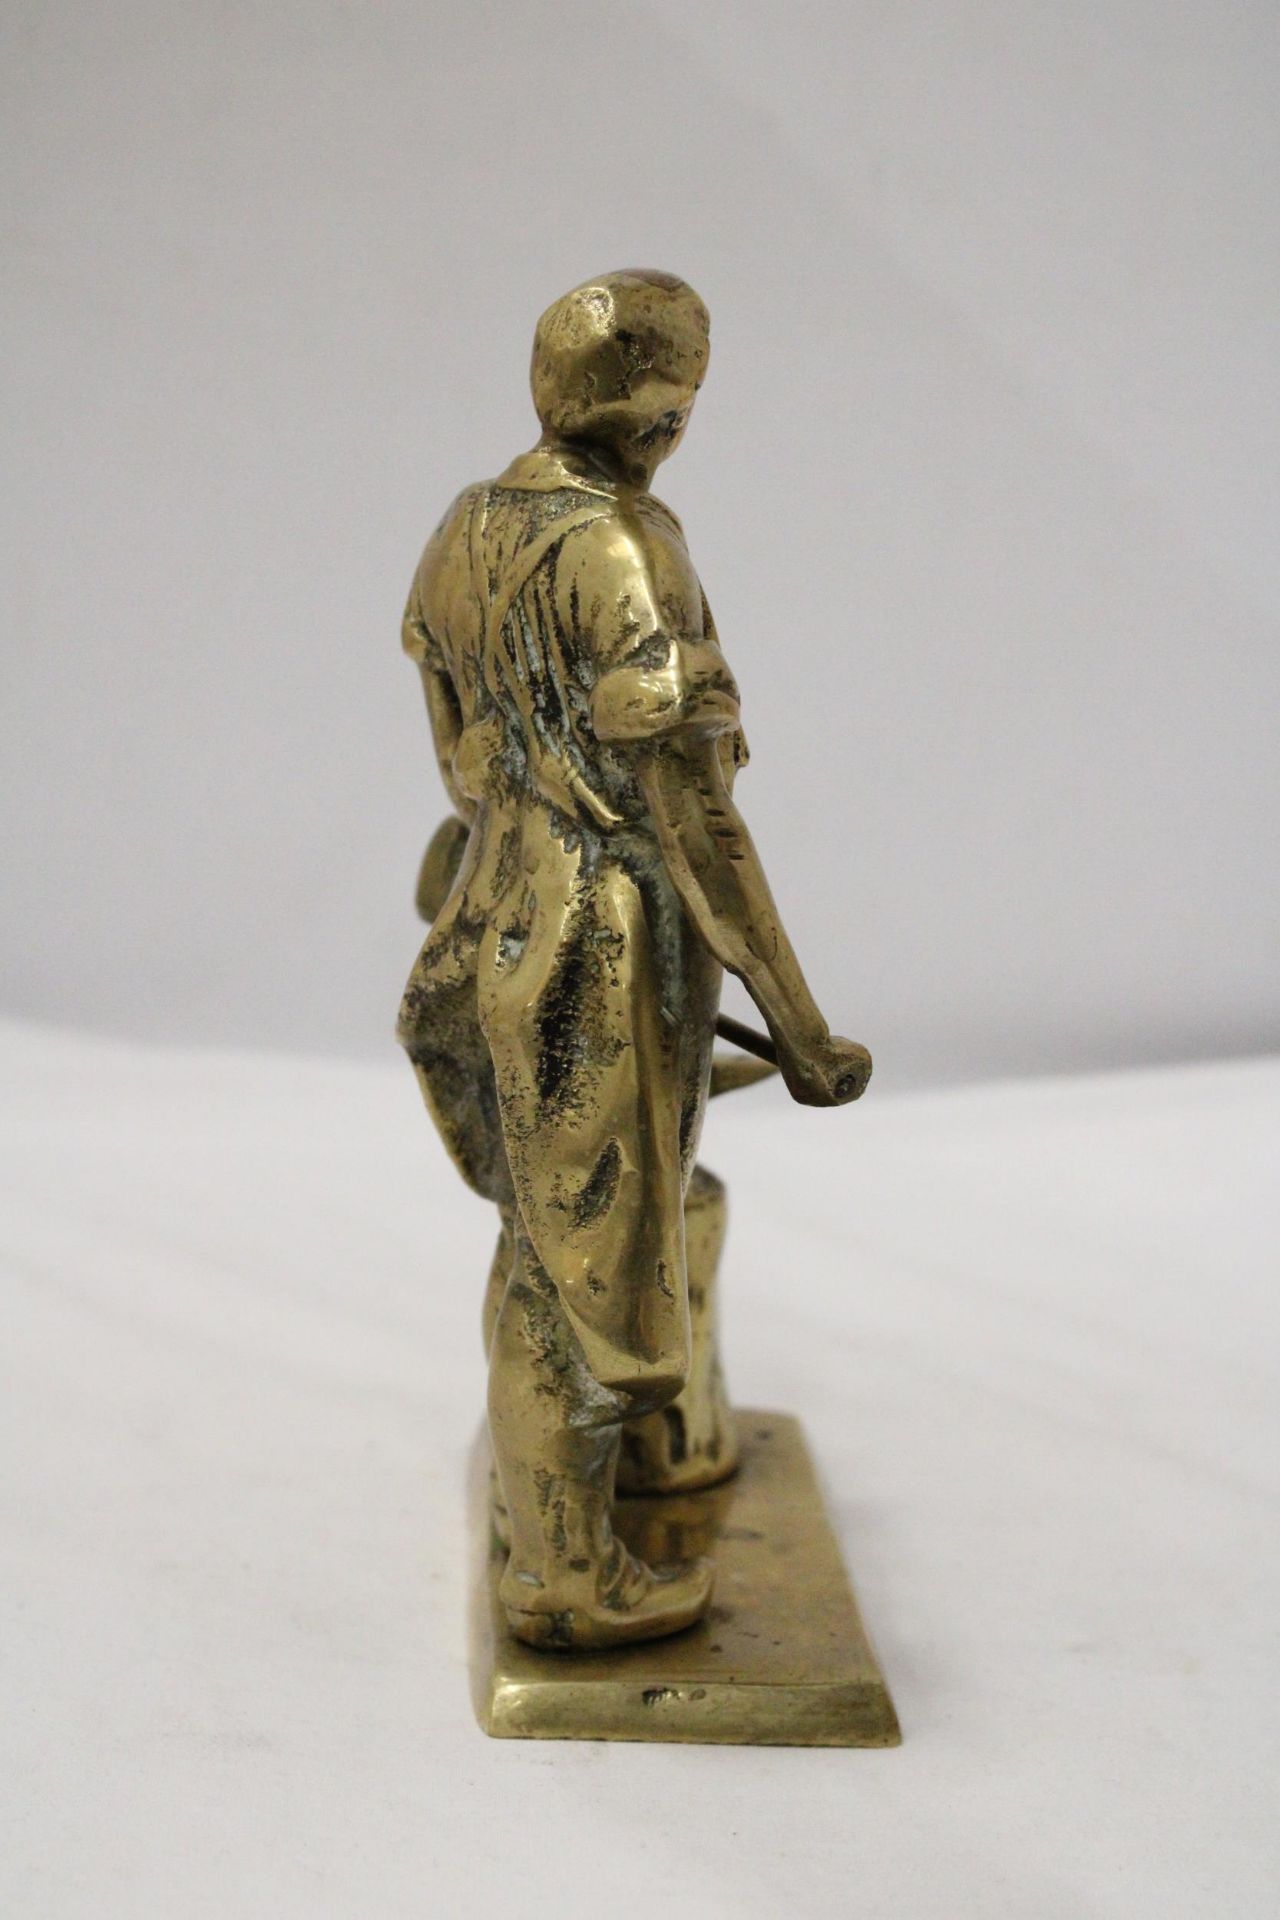 A HEAVY, SOLID, BRASS BLACKSMITH FIGURE, WEIGHS 4 KILOS, HEIGHT 20CM - Image 5 of 5